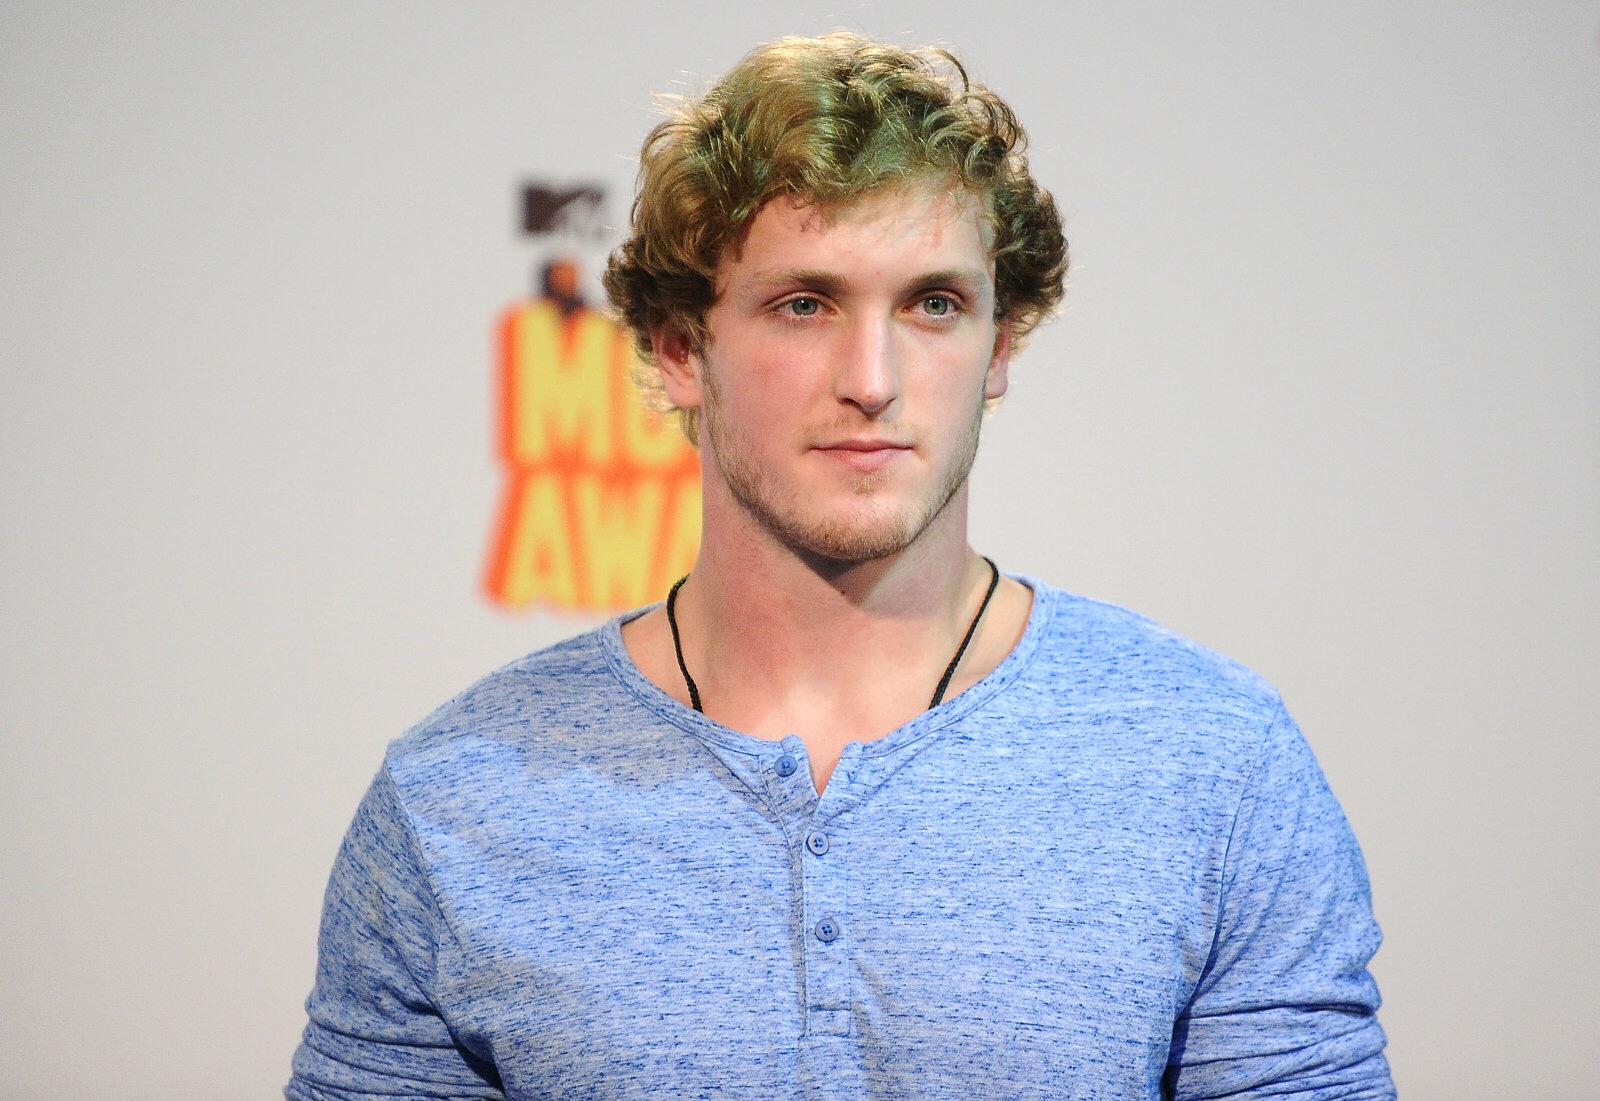 Disgraced YouTuber Logan Paul tries to save his image by donating $1 million to suicide prevention